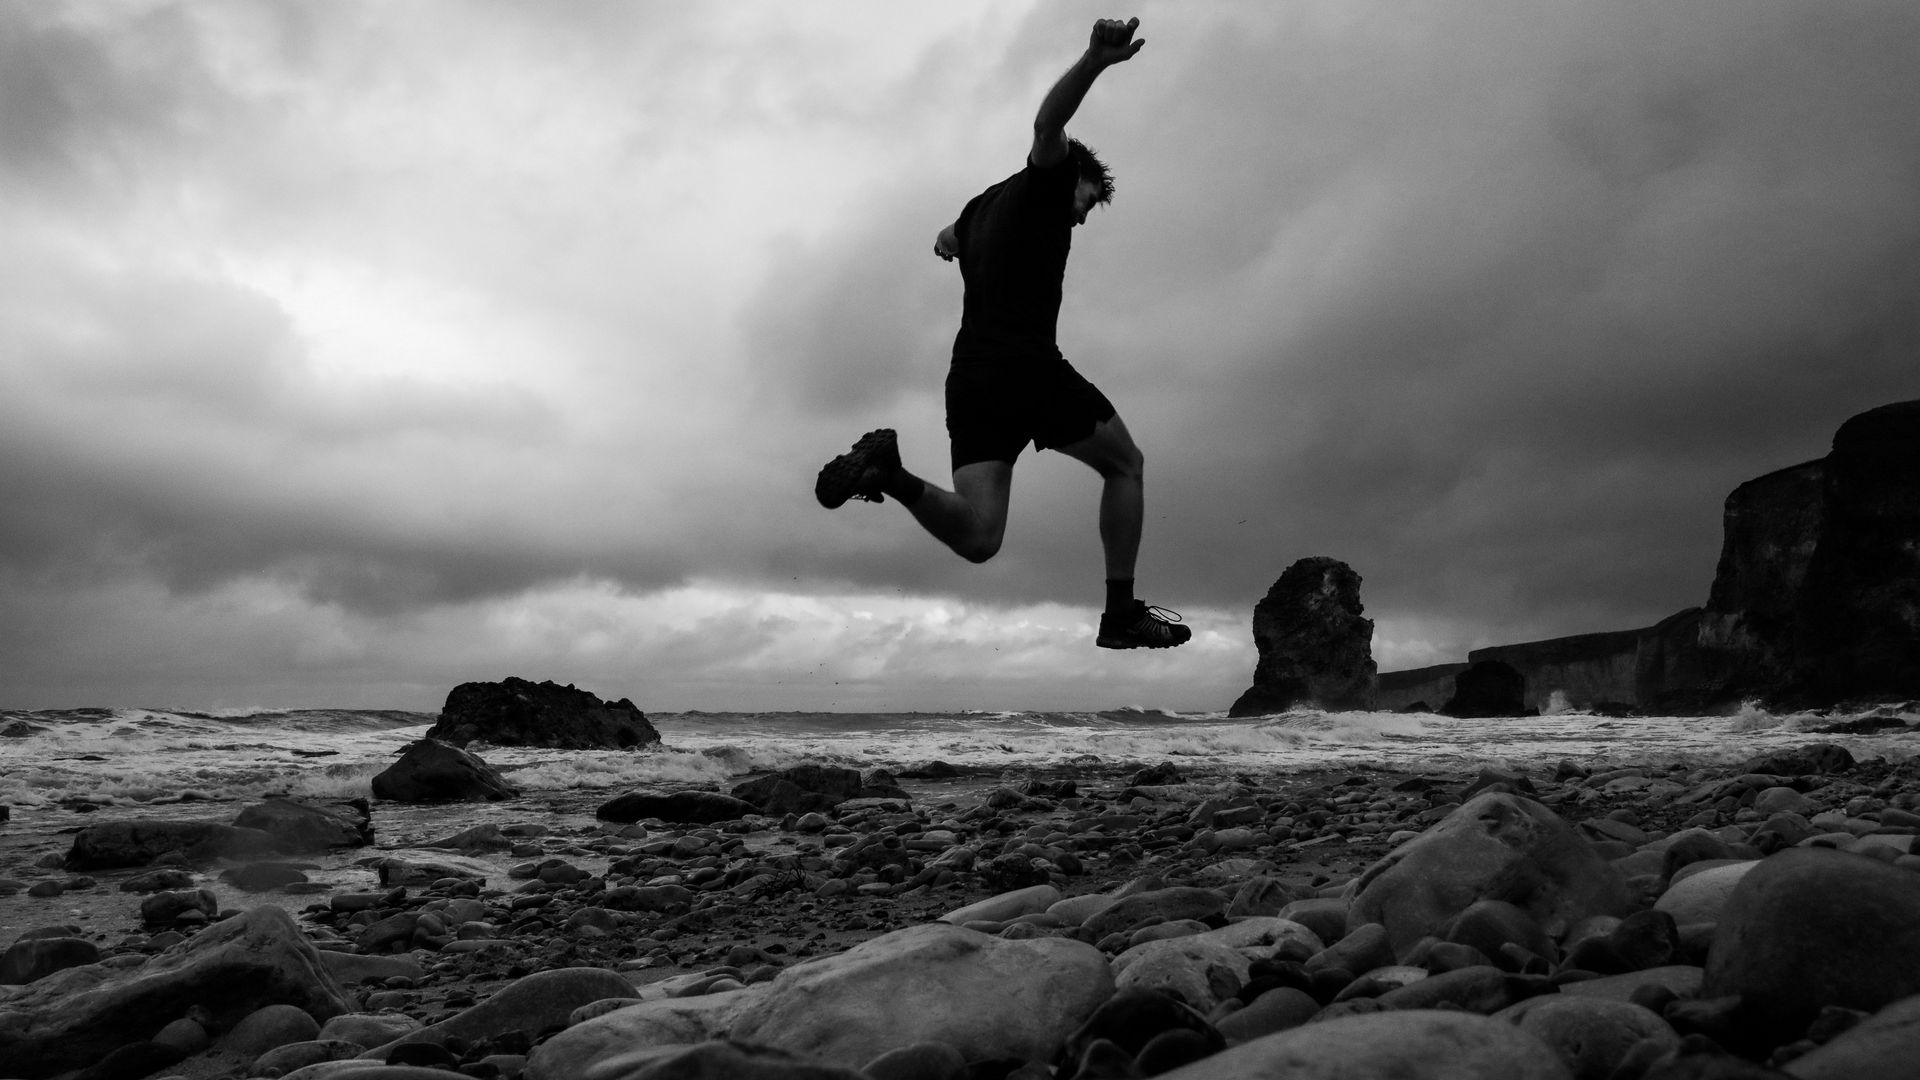 A low-angle shot shows a man in the air as he runs on a rocky beach.